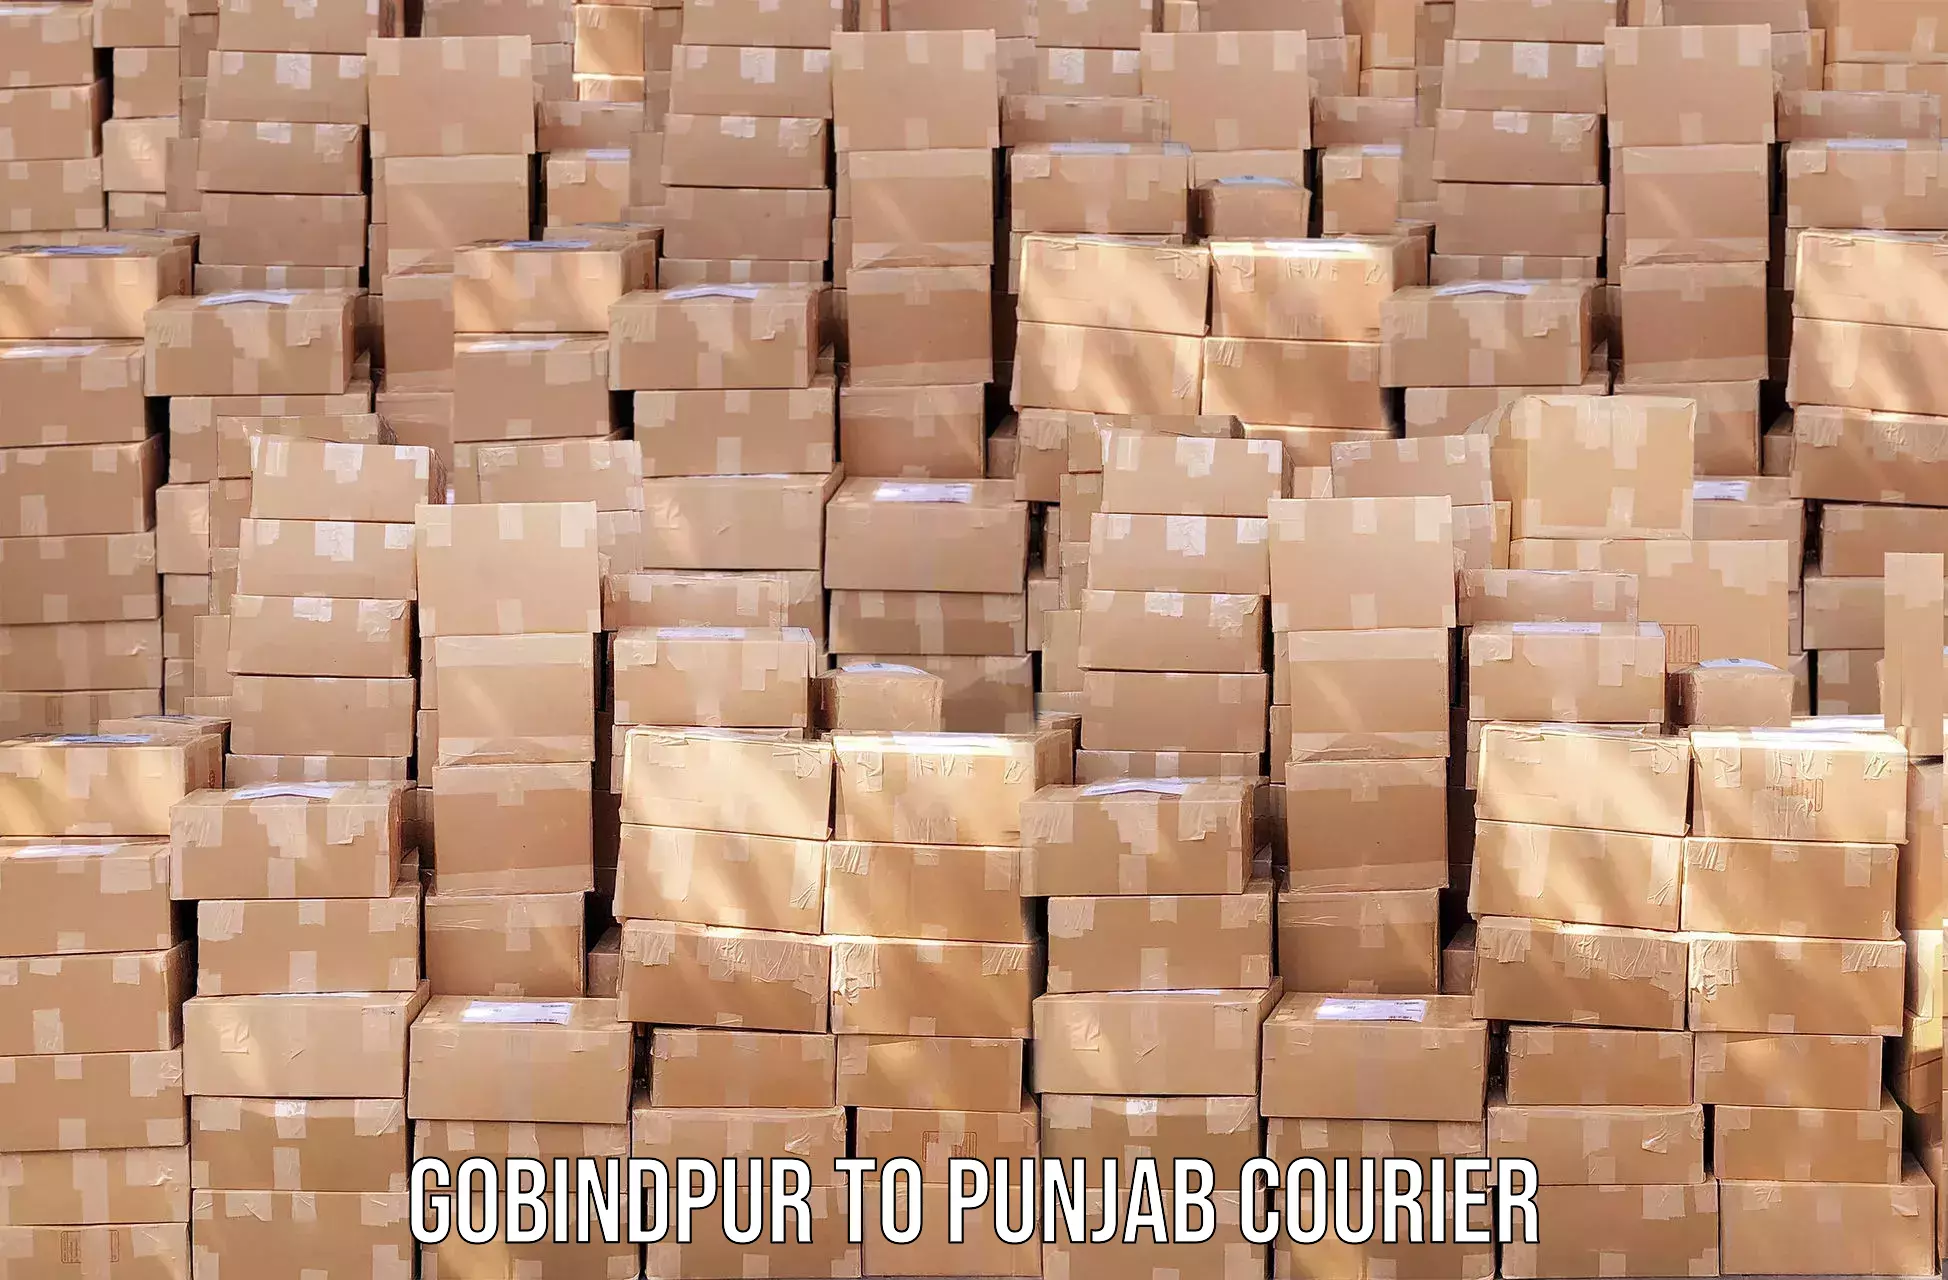 Professional courier handling Gobindpur to Sultanpur Lodhi